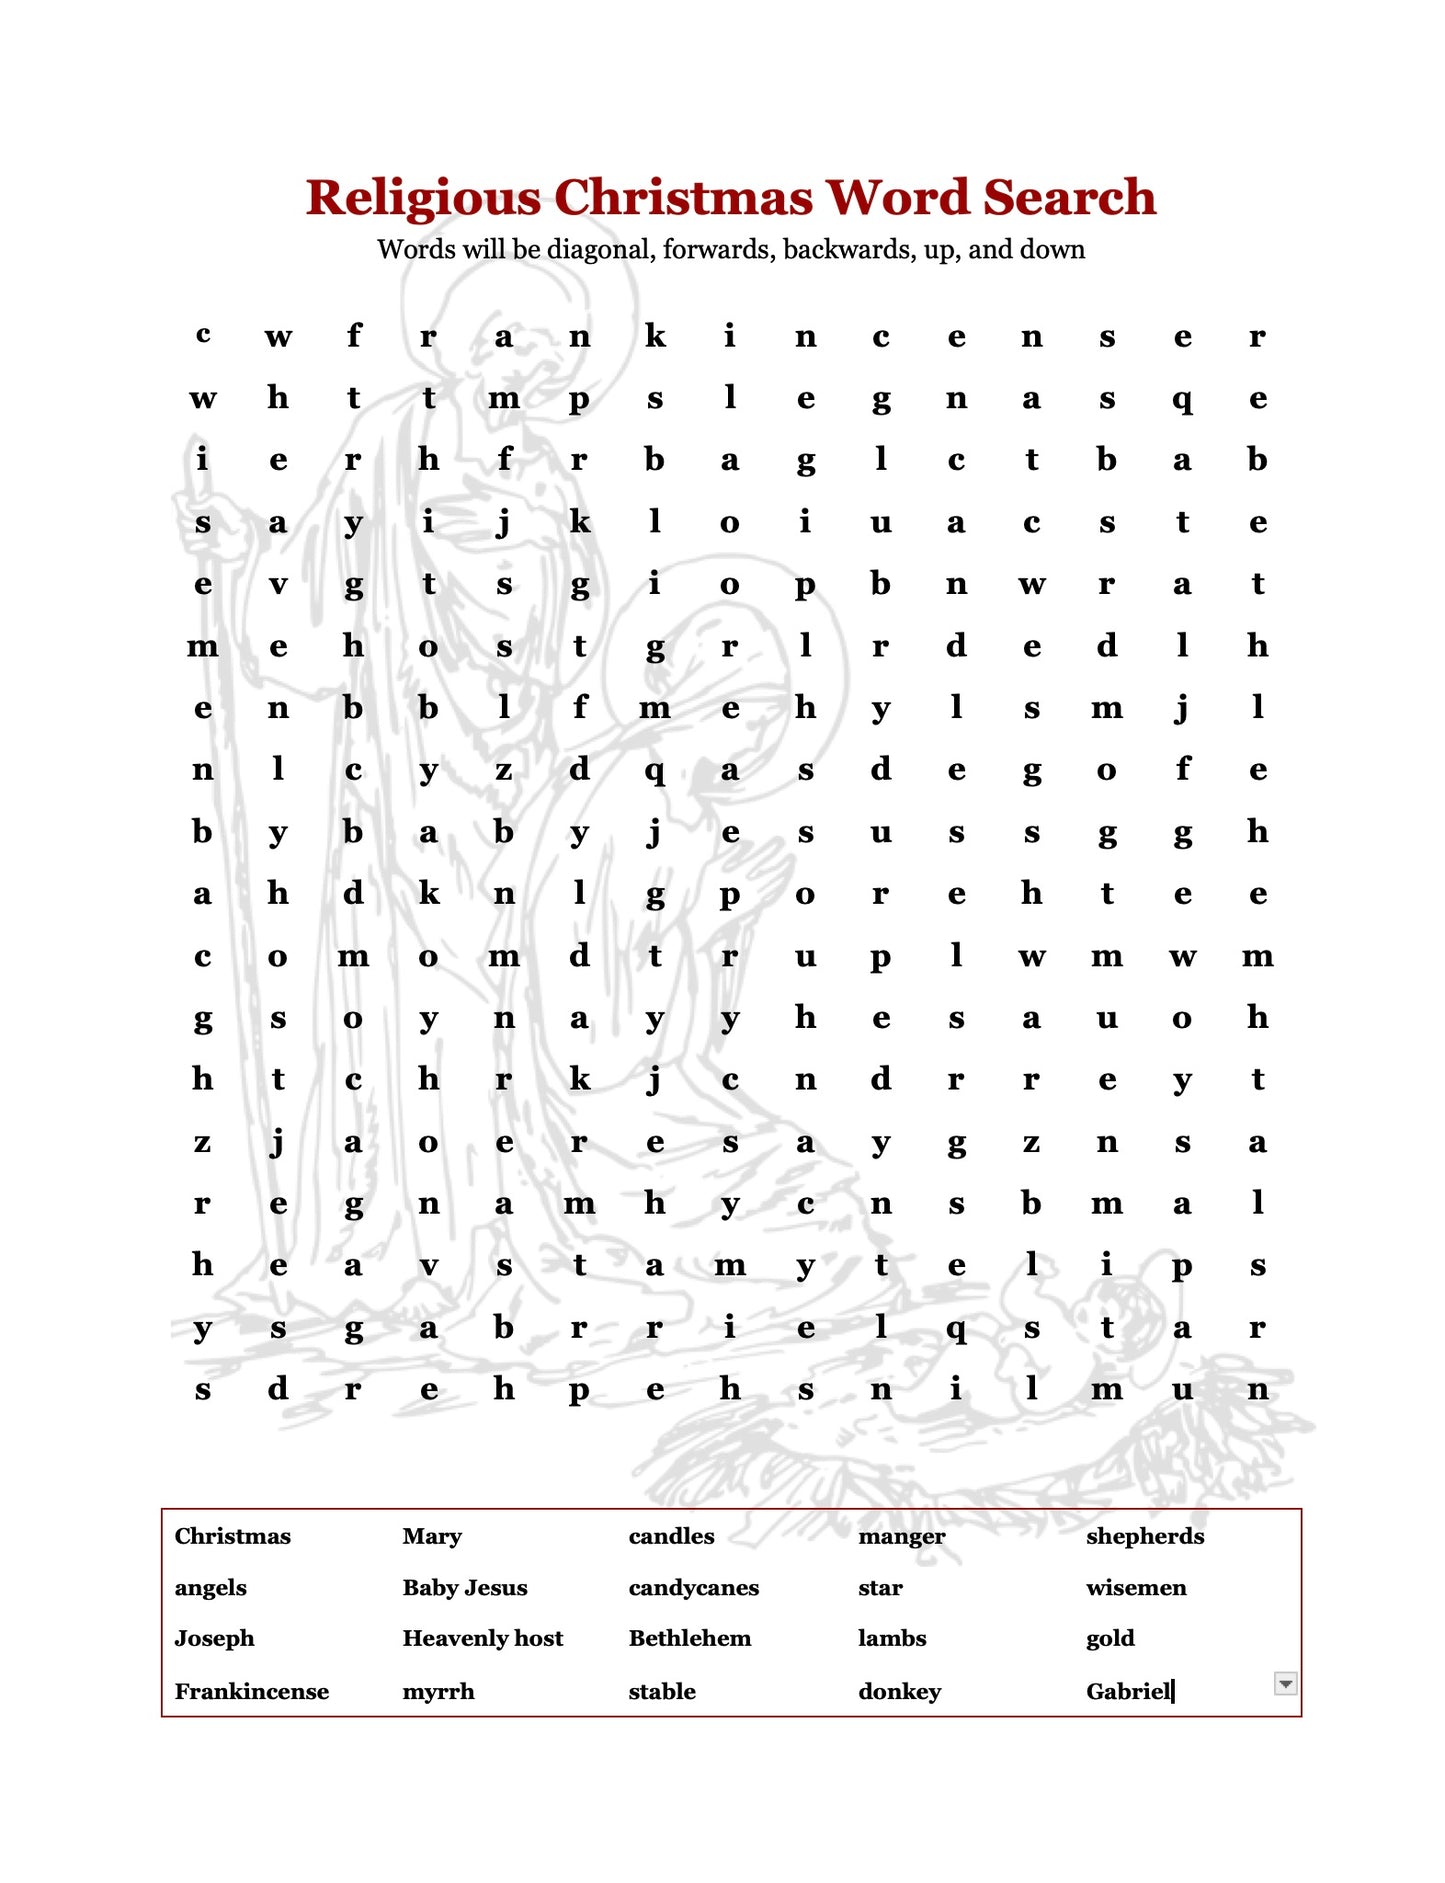 Religious Christmas Word Find